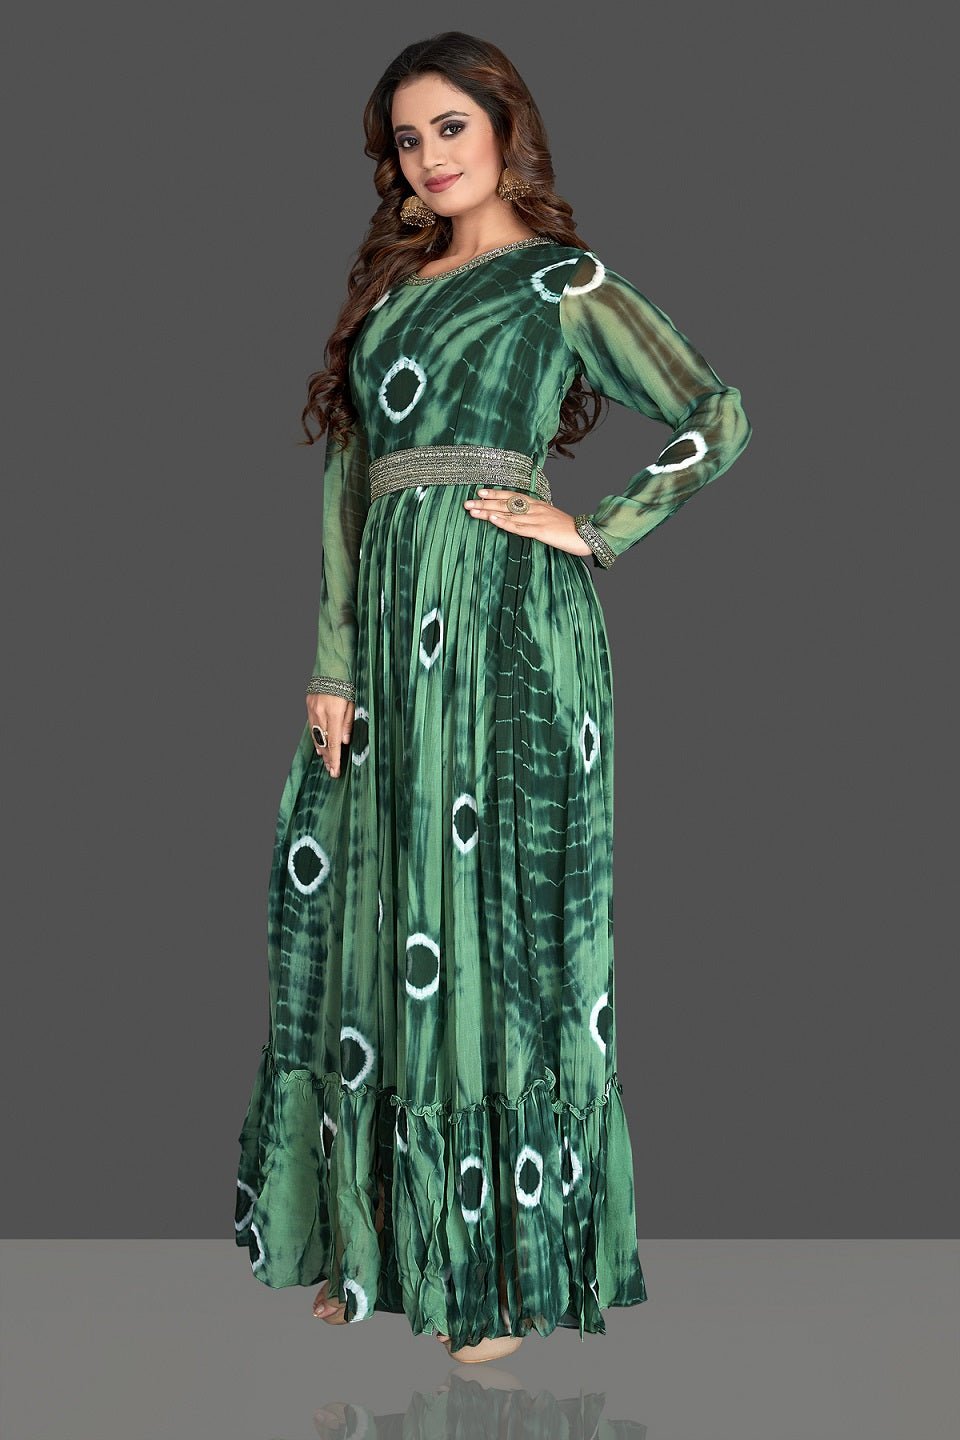 Buy stunning green bandhej georgette one piece dress online in USA. Elevate your Indian style with beautiful designer dresses, Indowestern outfits, designer salwar suits from Pure Elegance Indian fashion store in USA.-left